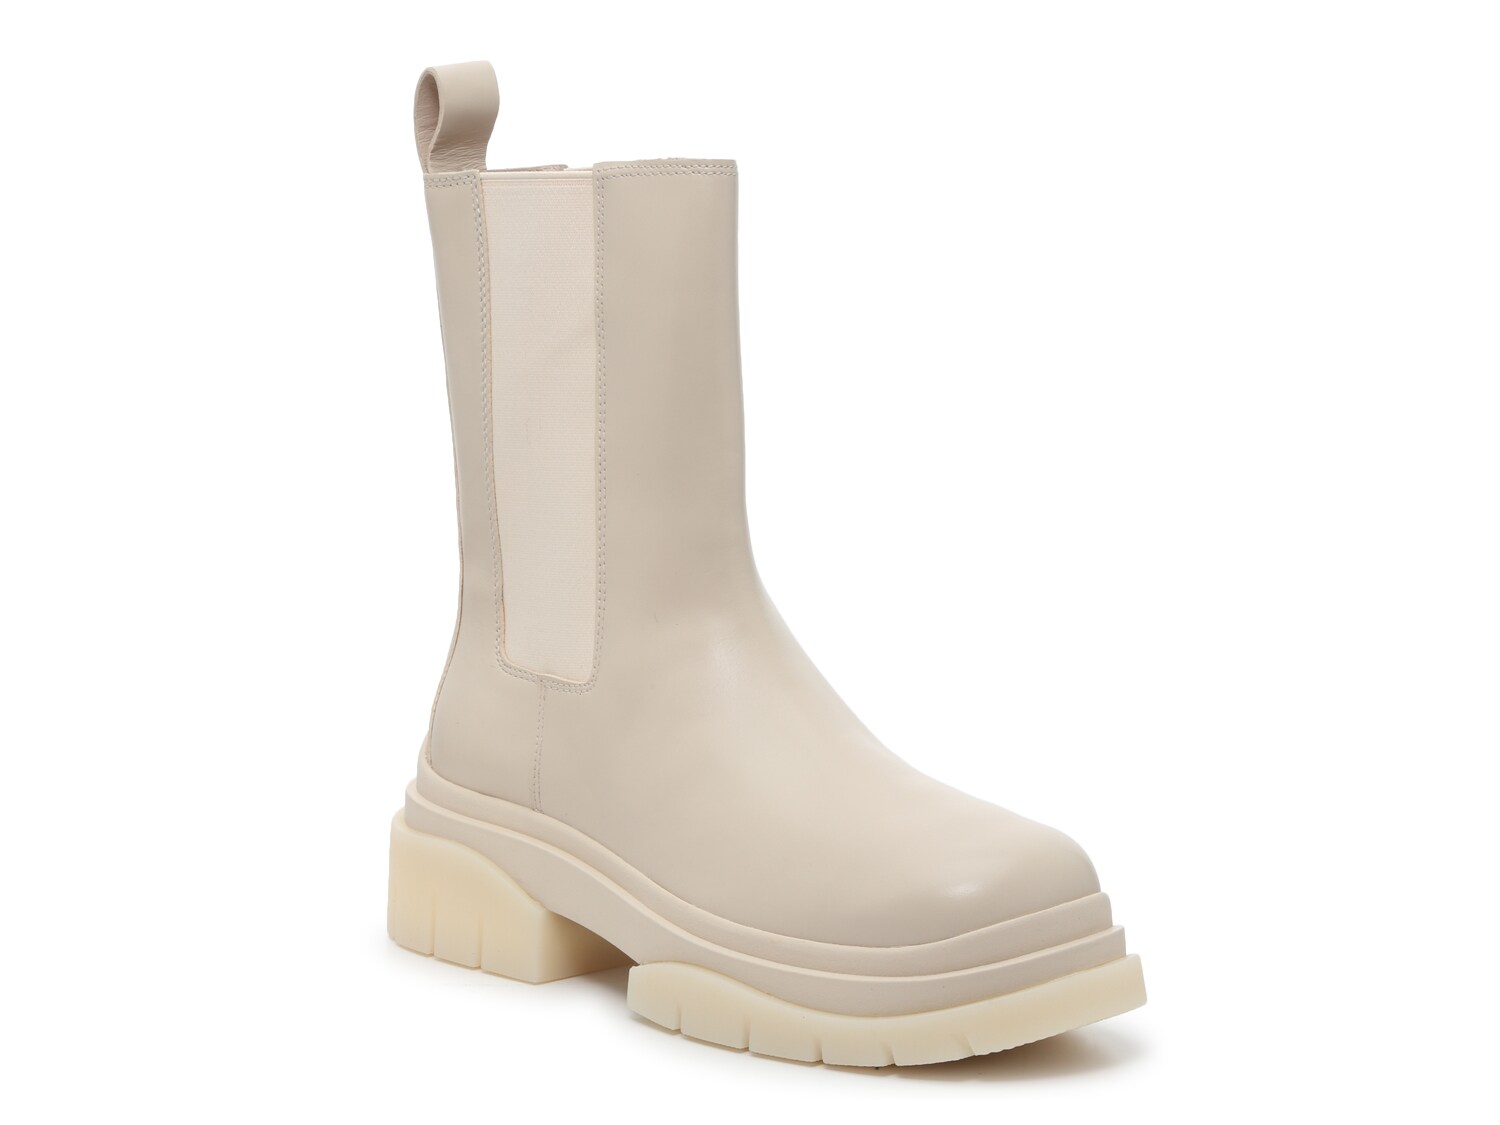 ASH Storm Platform Chelsea Boot - Free Shipping | DSW